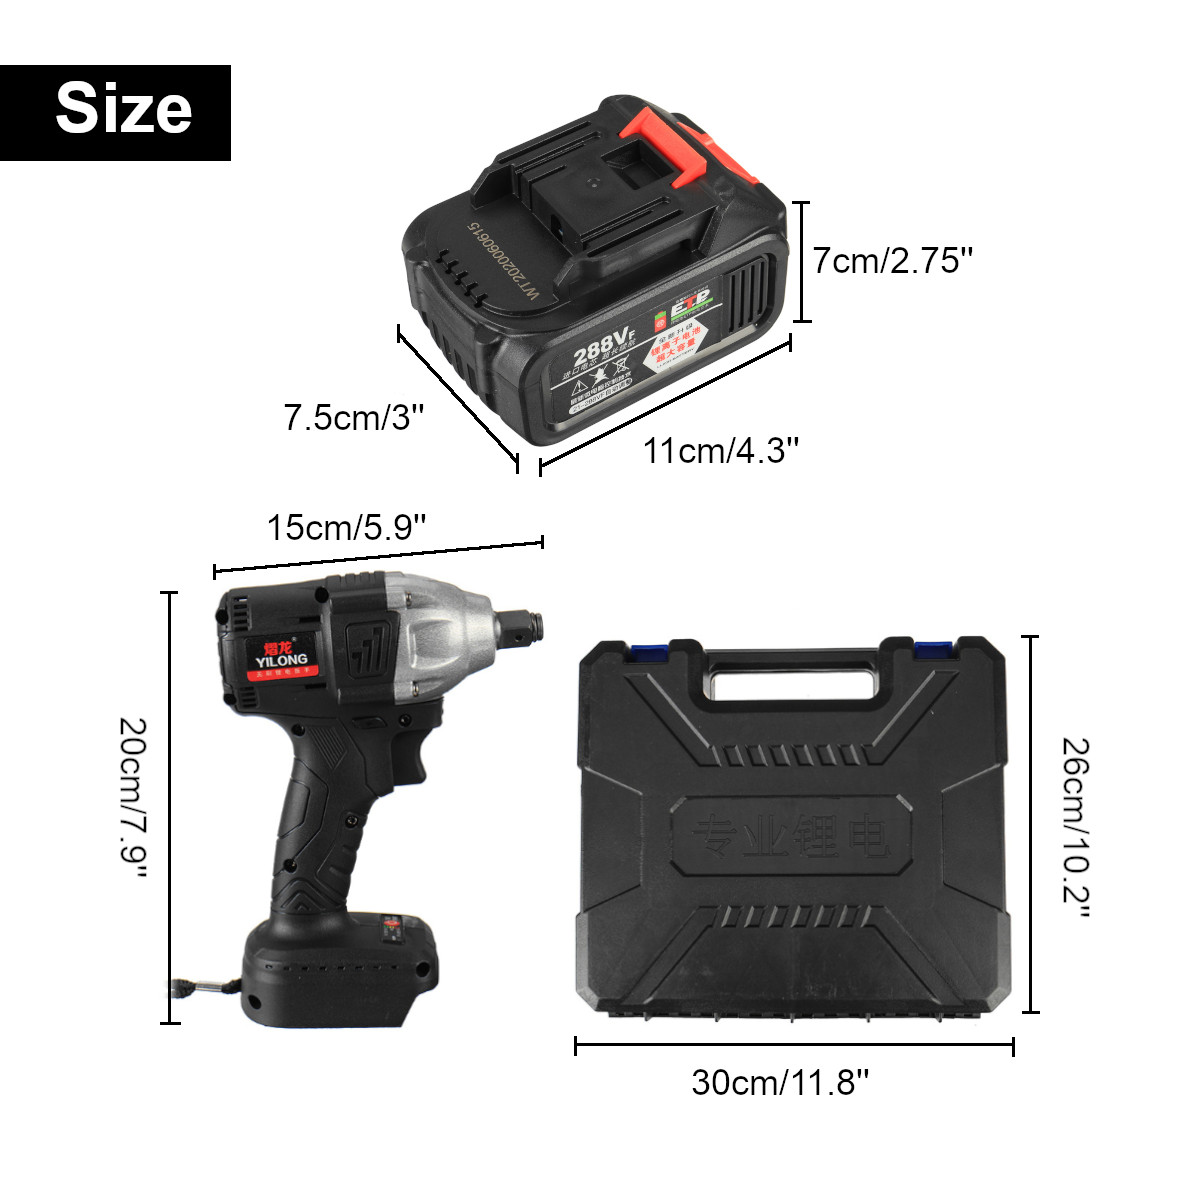 100-240V-21V-Cordless-Brushless-Electric-Wrench-600Nm-Impact-Wrench-20000mAh-Recharge-1790565-8